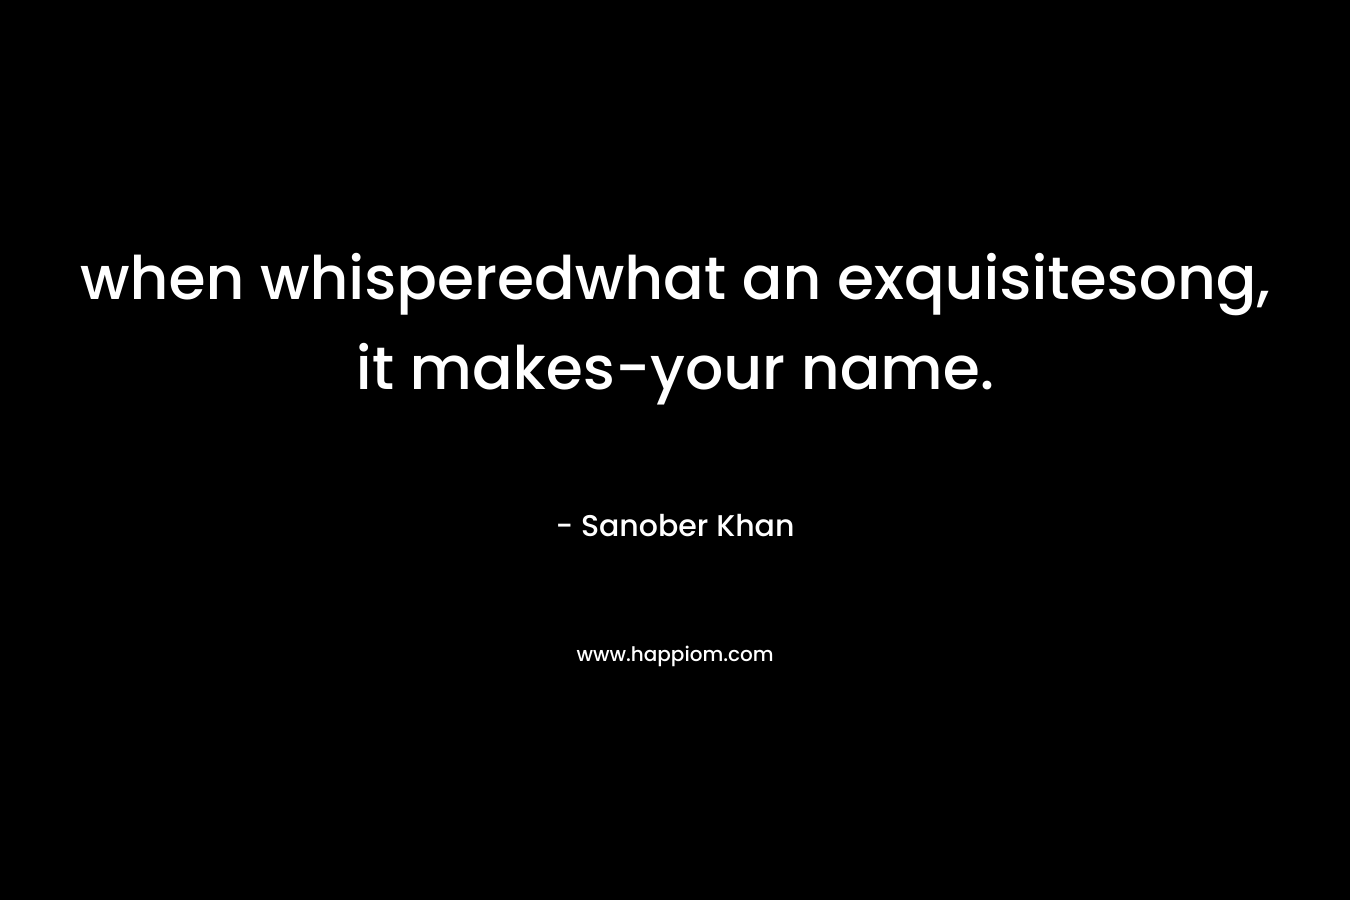 when whisperedwhat an exquisitesong, it makes-your name.